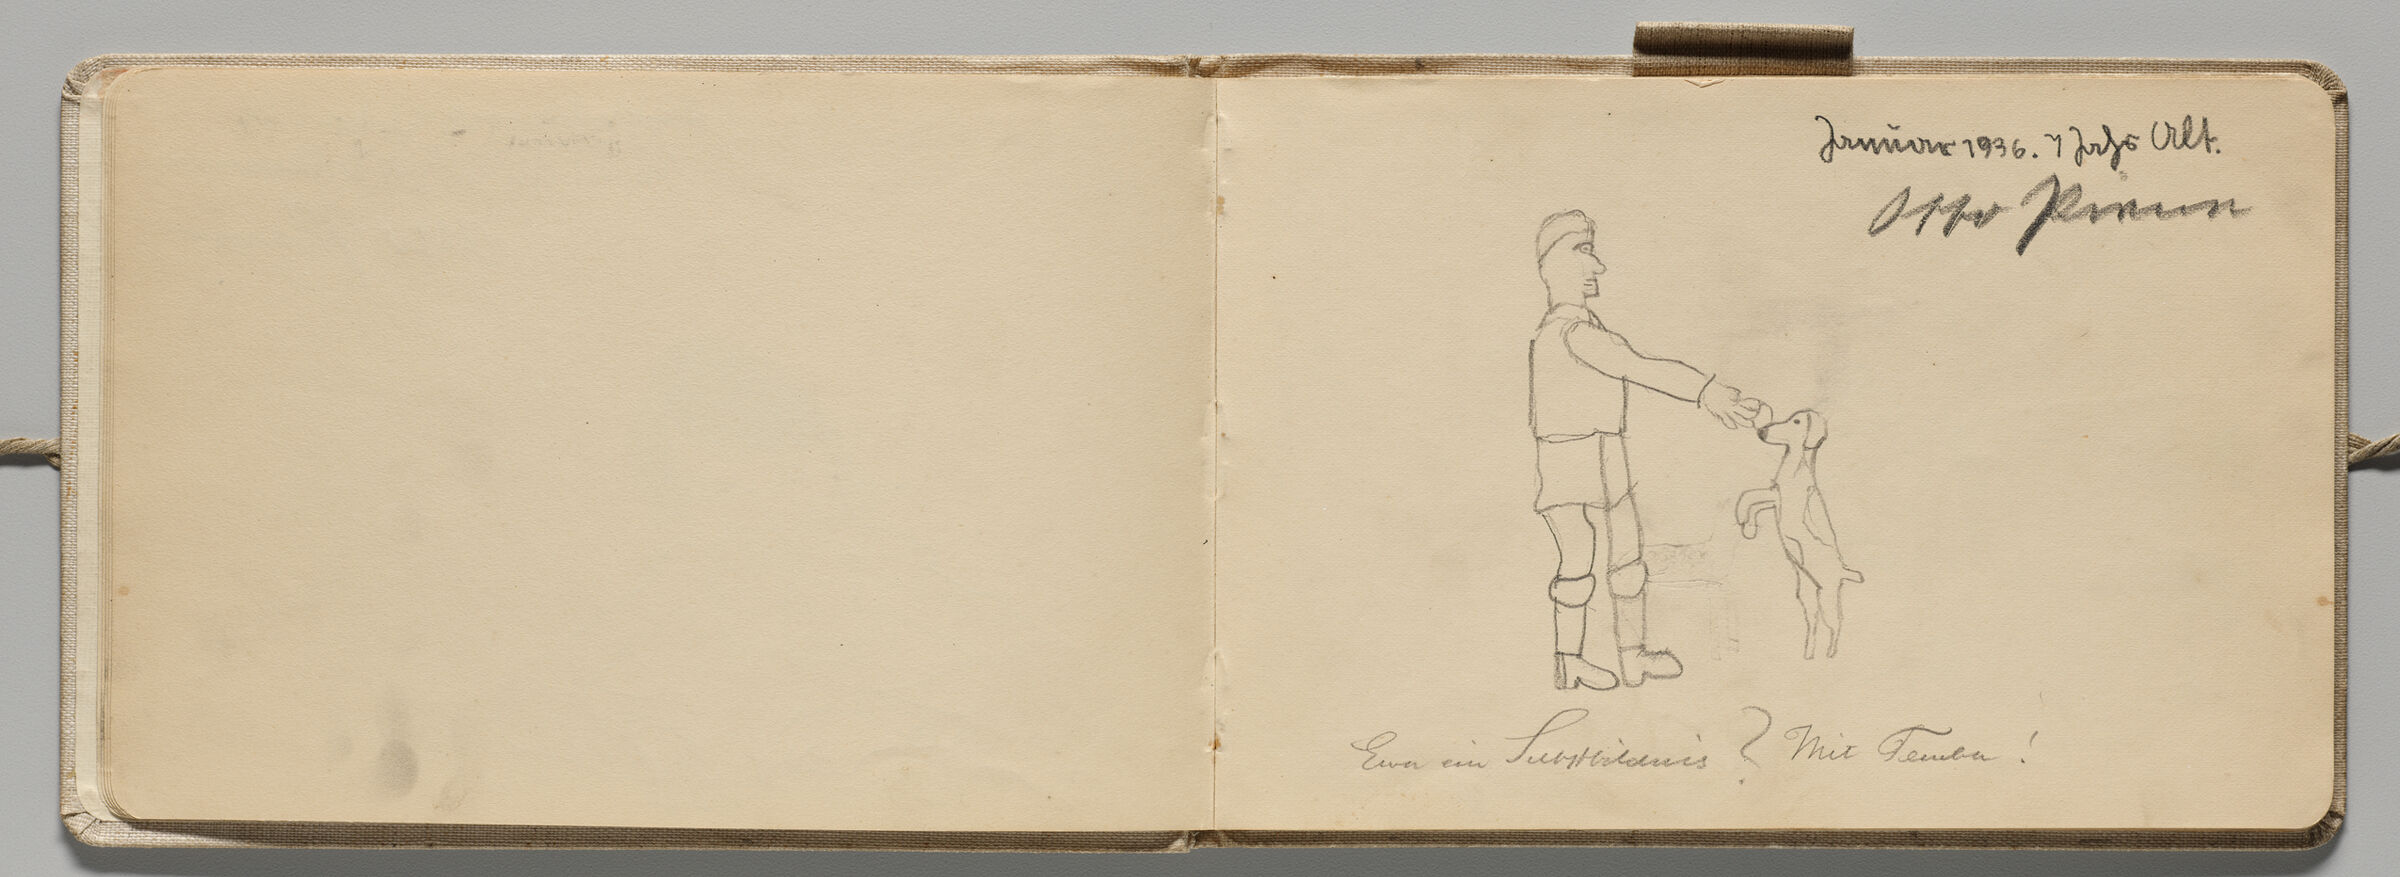 Untitled (Blank With Finger Smudge, Left Page); Untitled (Figure (Possible Self-Portrait) With Dog, Right Page)